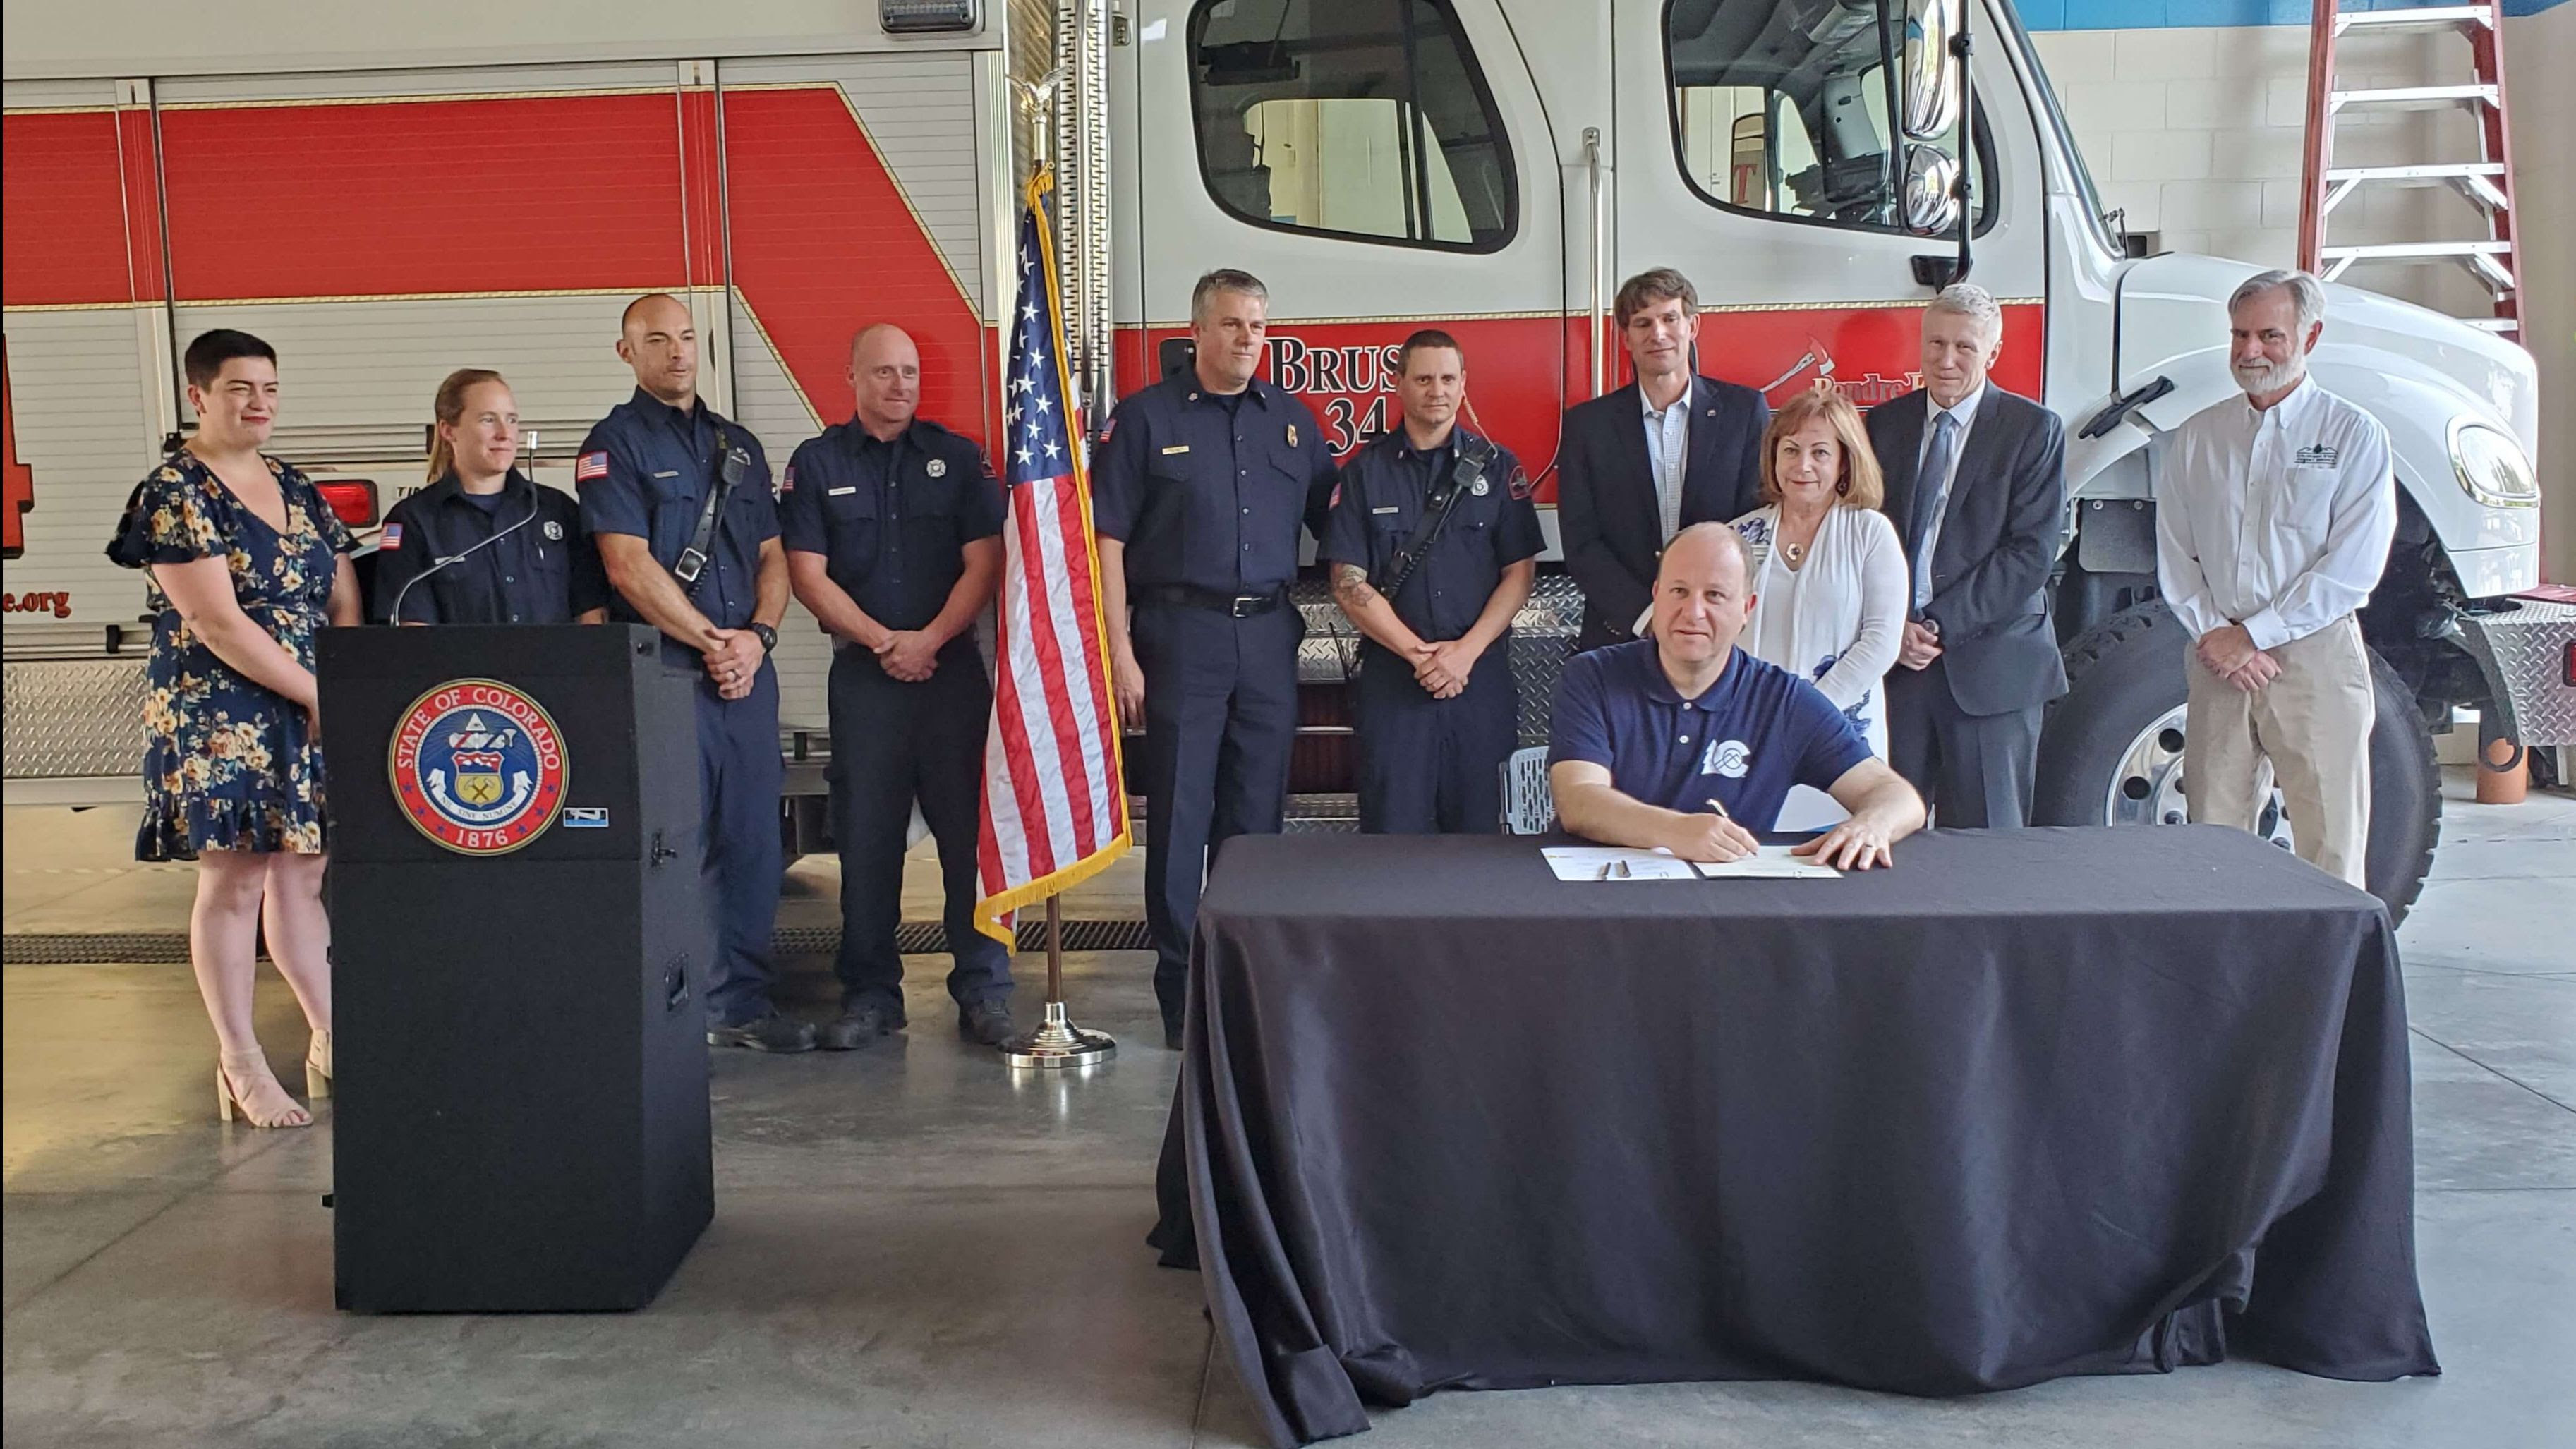 Governor signs Watershed Protection Bill at table with people and ambulance behind him